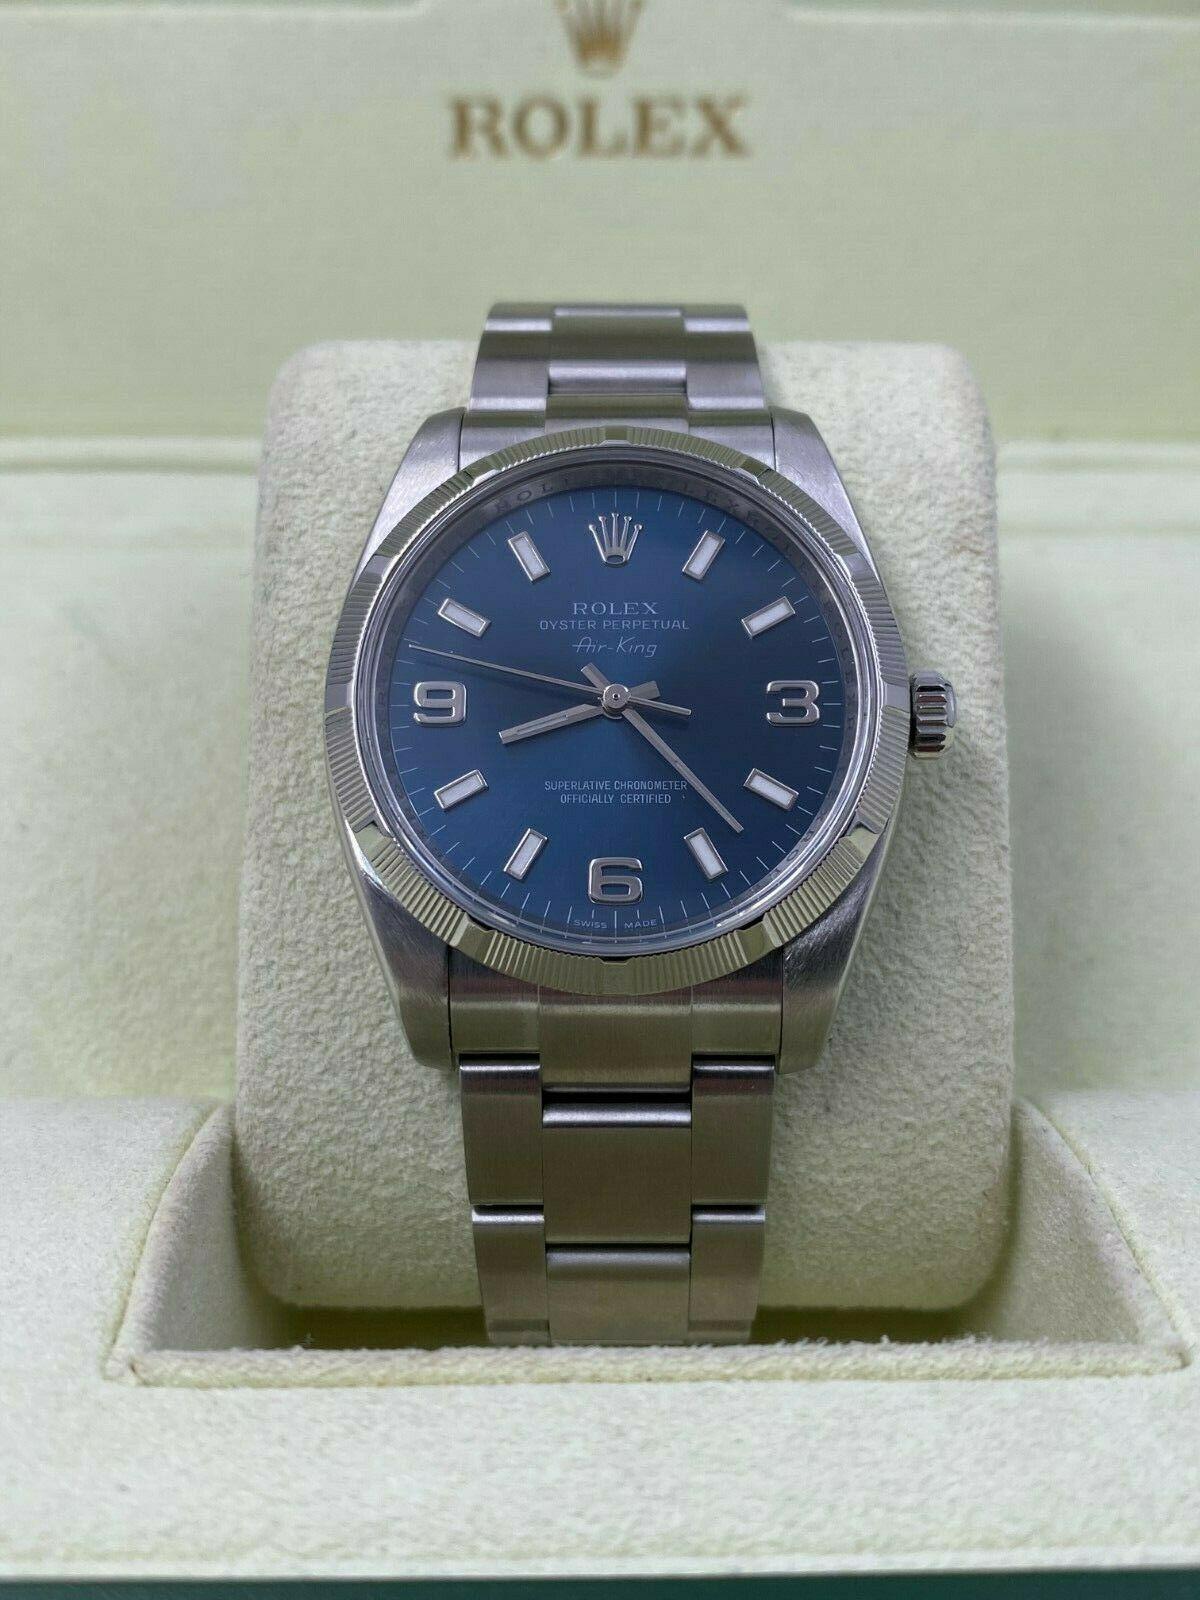 Style Number: 114210 

Serial: Z867***

Year: 2007 

Model: Air King 

Case Material: Stainless Steel 

Band: Stainless Steel 

Bezel:  Stainless Steel 

Dial: Blue 

Face: Sapphire Crystal 

Case Size: 34mm 

Includes: 
-Rolex Box &